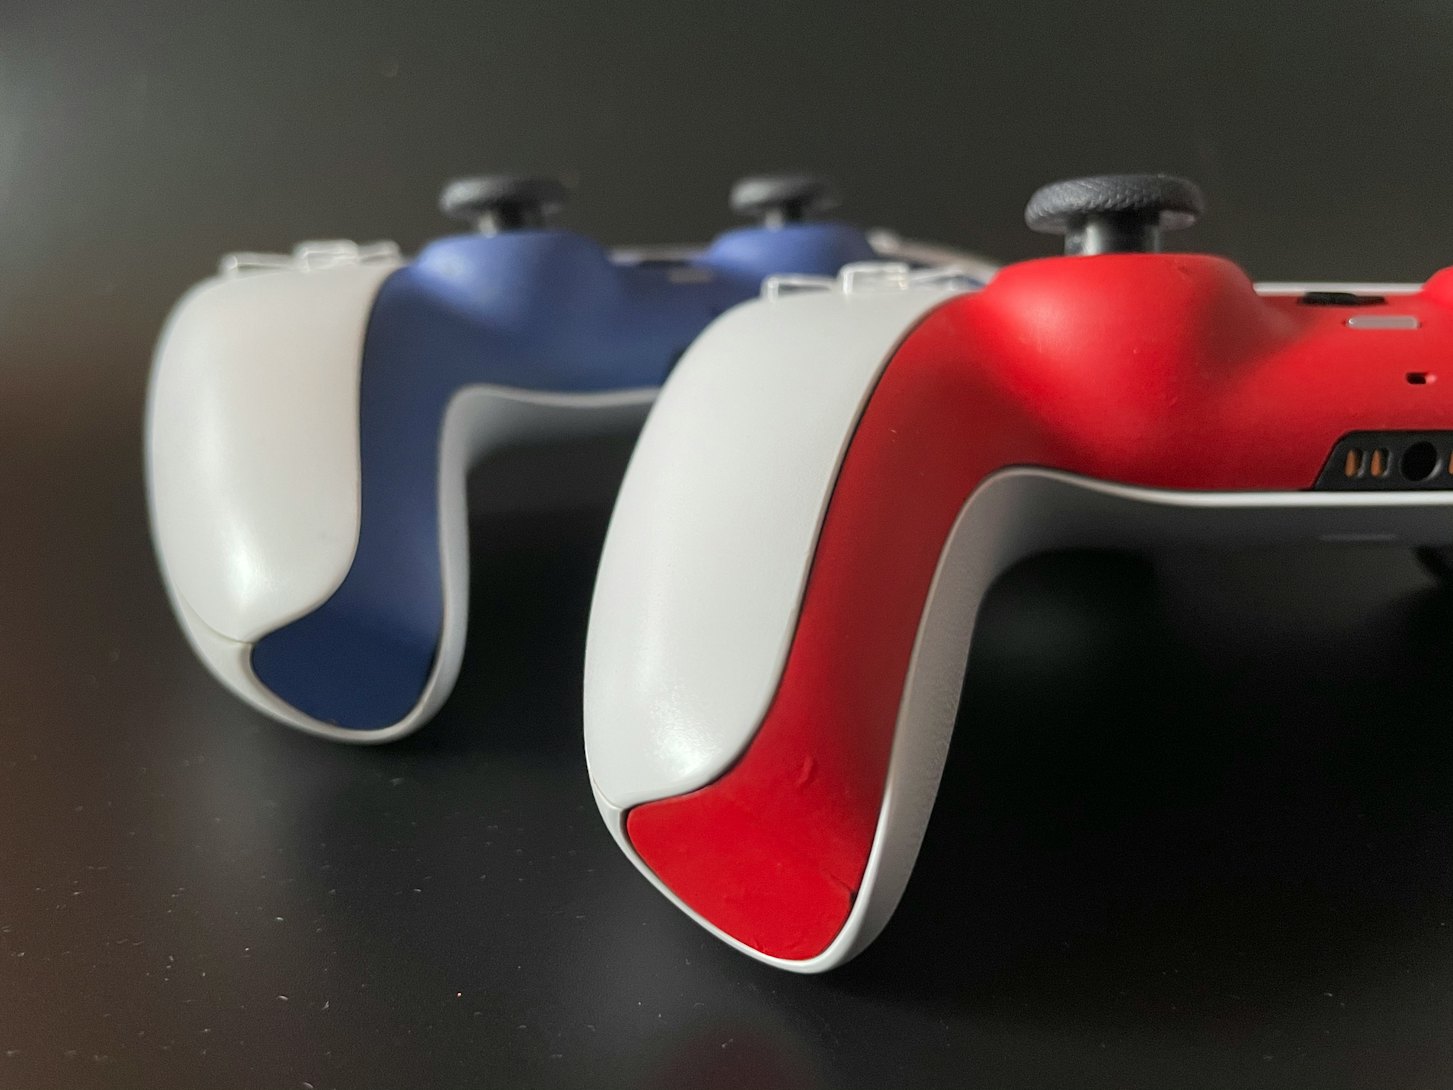 How to Paint Gaming Controllers - DIY Customized Video Game Controller